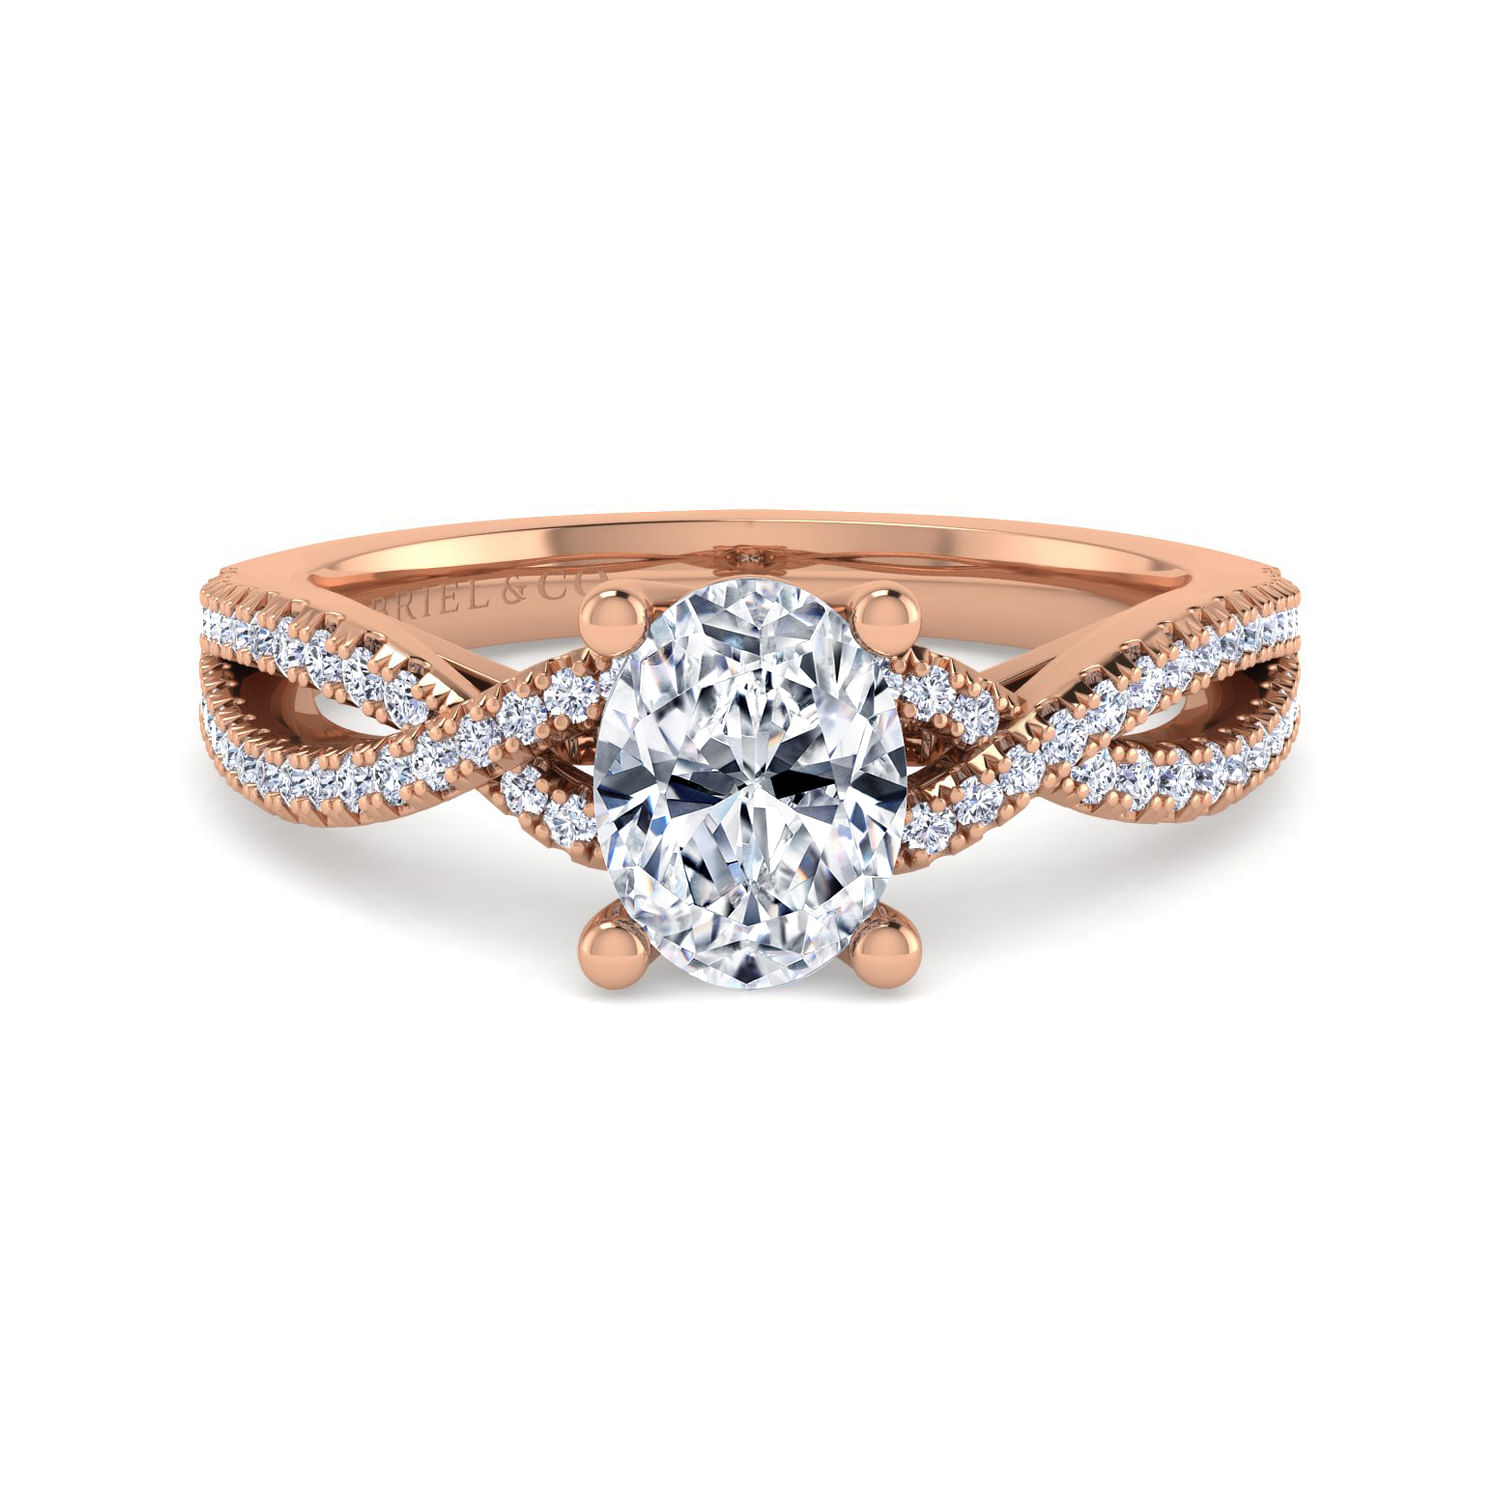 Gina - 14K Rose Gold Twisted Oval Diamond Engagement Ring